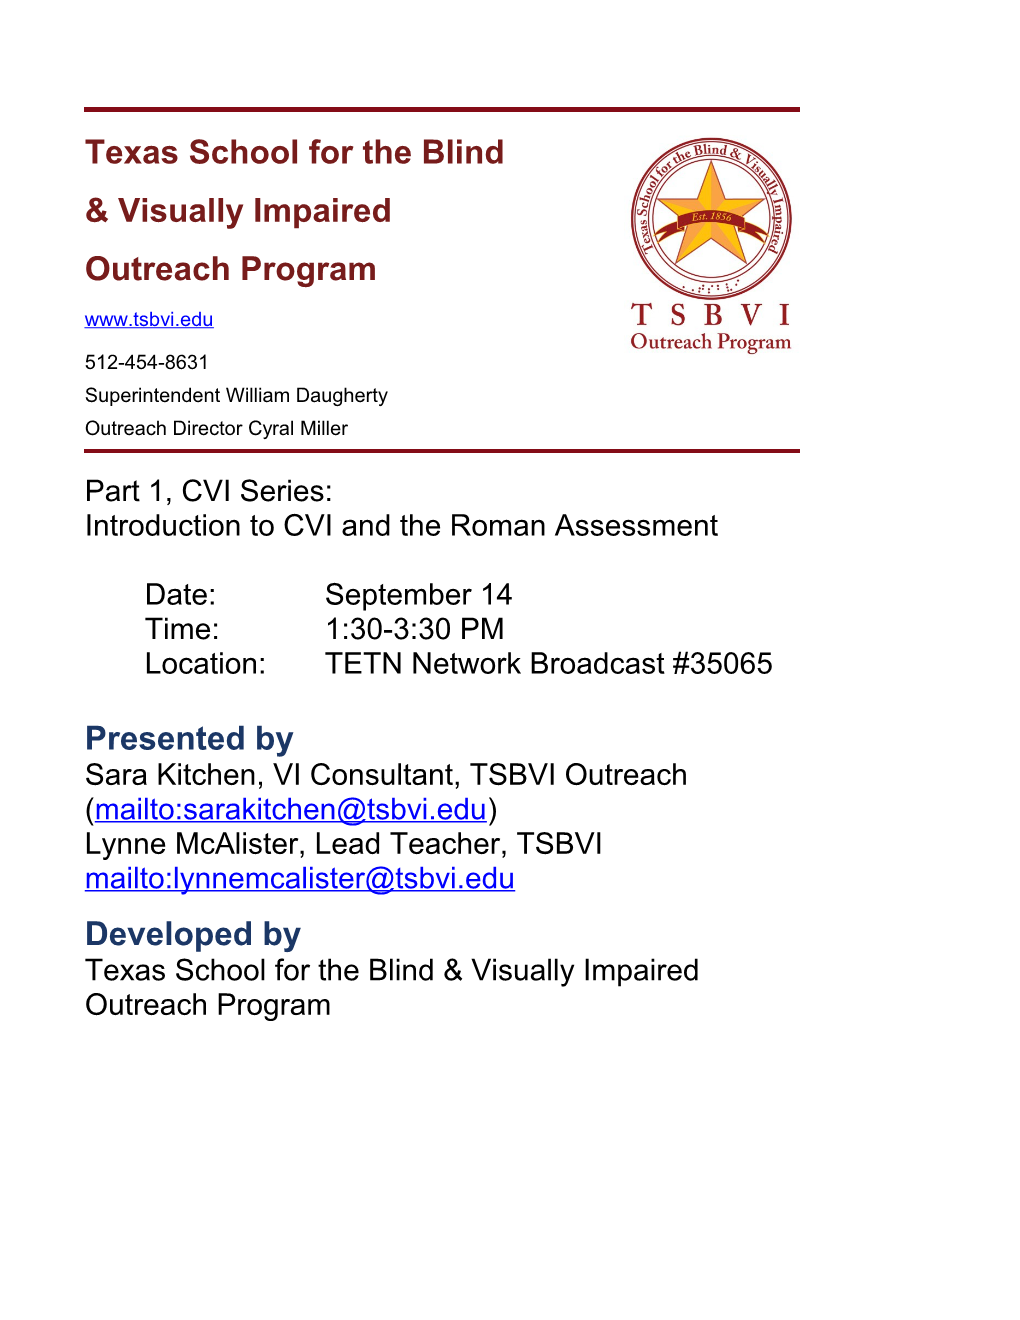 Cortical Visual Impairment-What We Learned at the Cvi Conference